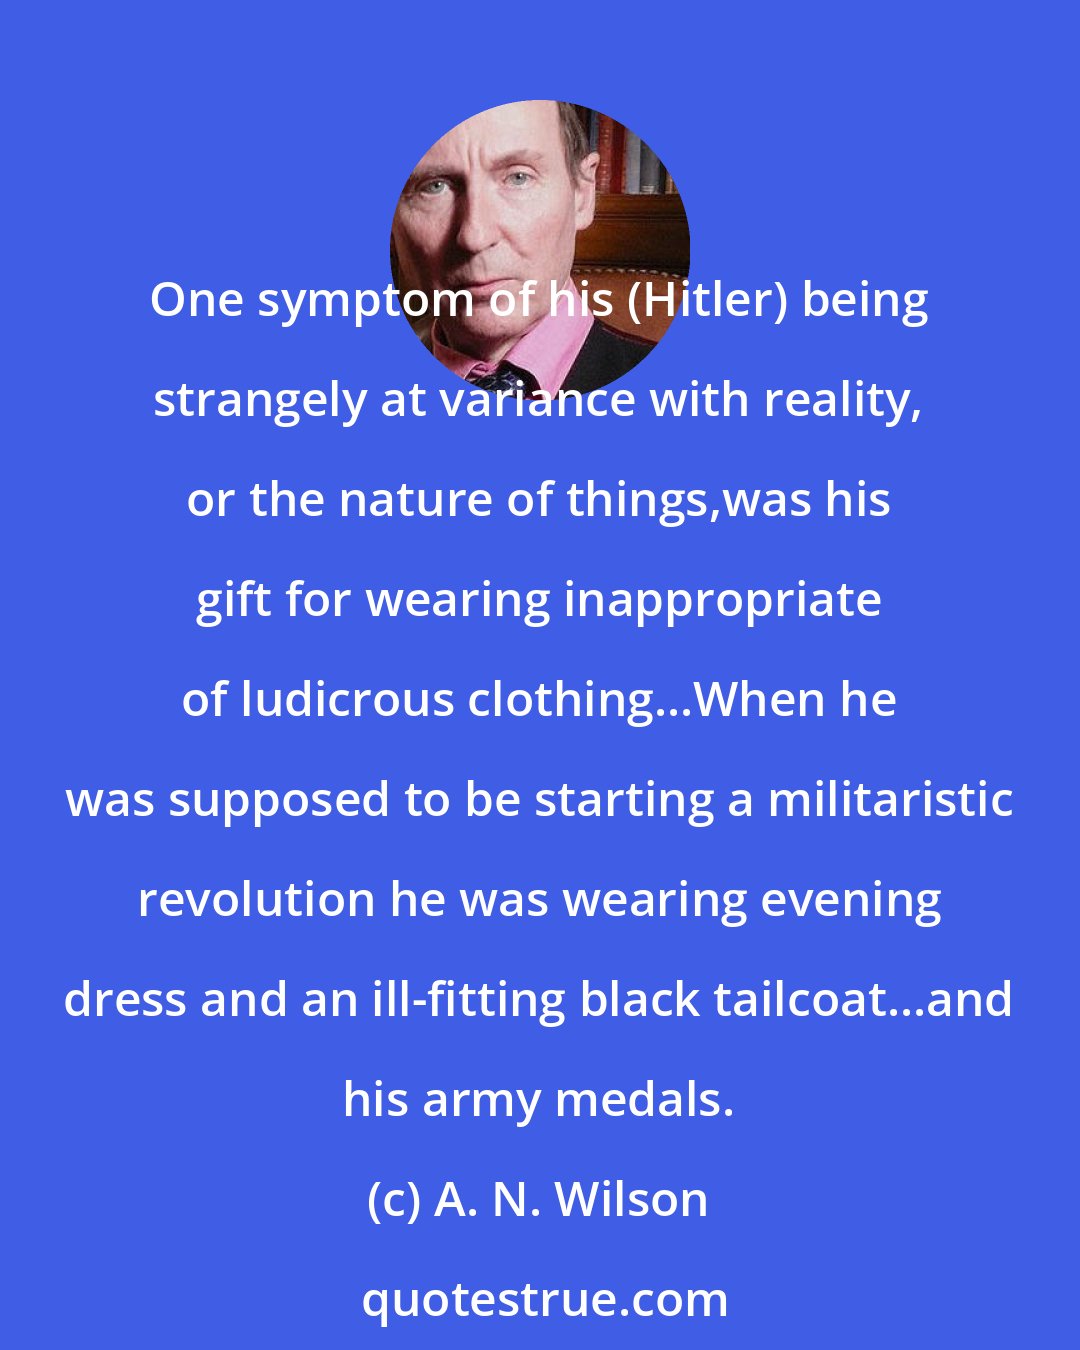 A. N. Wilson: One symptom of his (Hitler) being strangely at variance with reality, or the nature of things,was his gift for wearing inappropriate of ludicrous clothing...When he was supposed to be starting a militaristic revolution he was wearing evening dress and an ill-fitting black tailcoat...and his army medals.